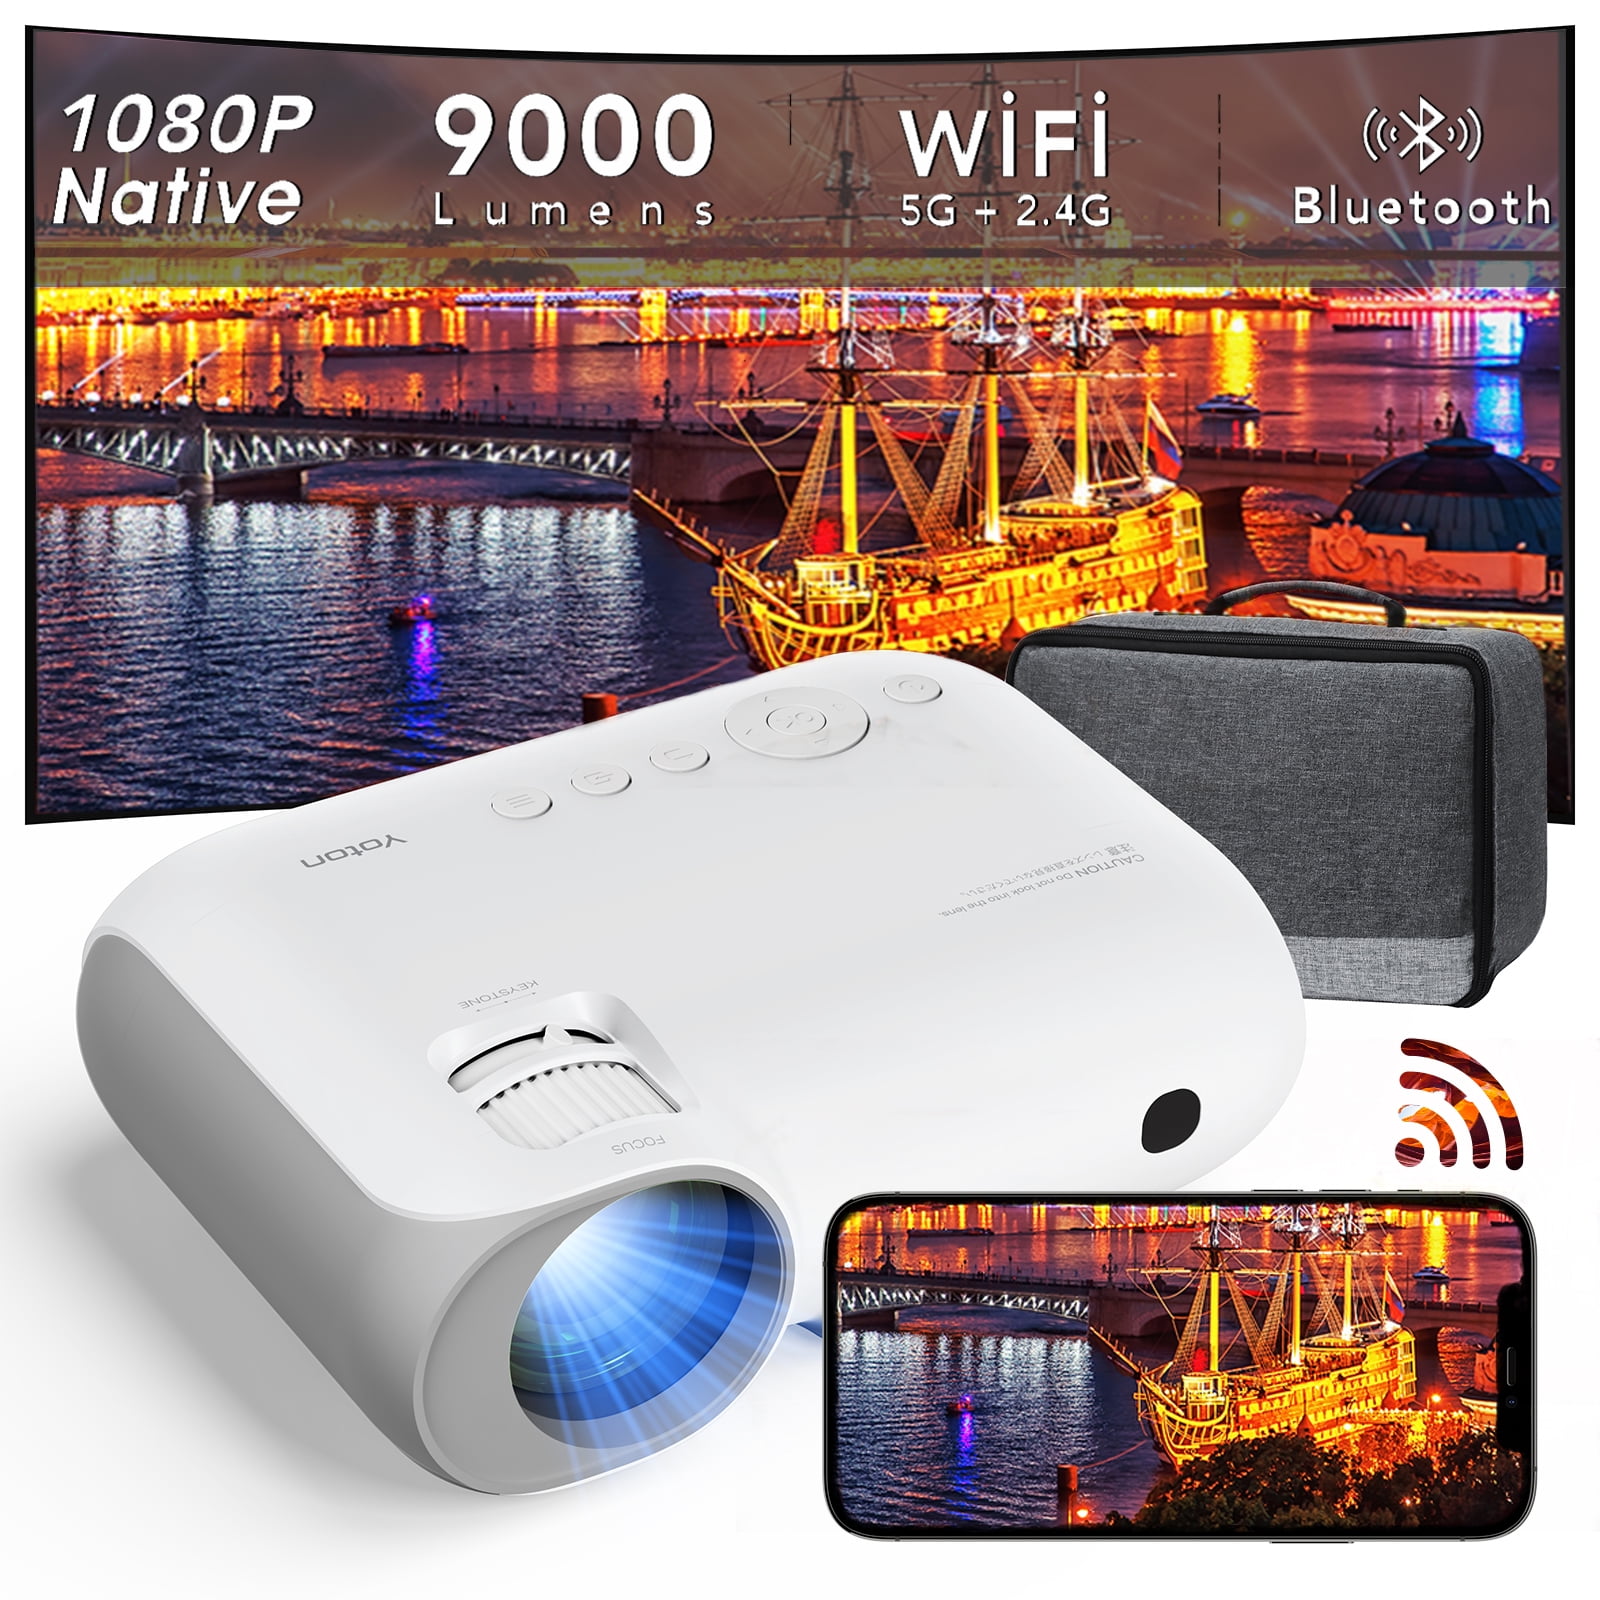 Native 1080P Smart Home Cinema Projector Android WiFi BT Proyector Daytime  Party